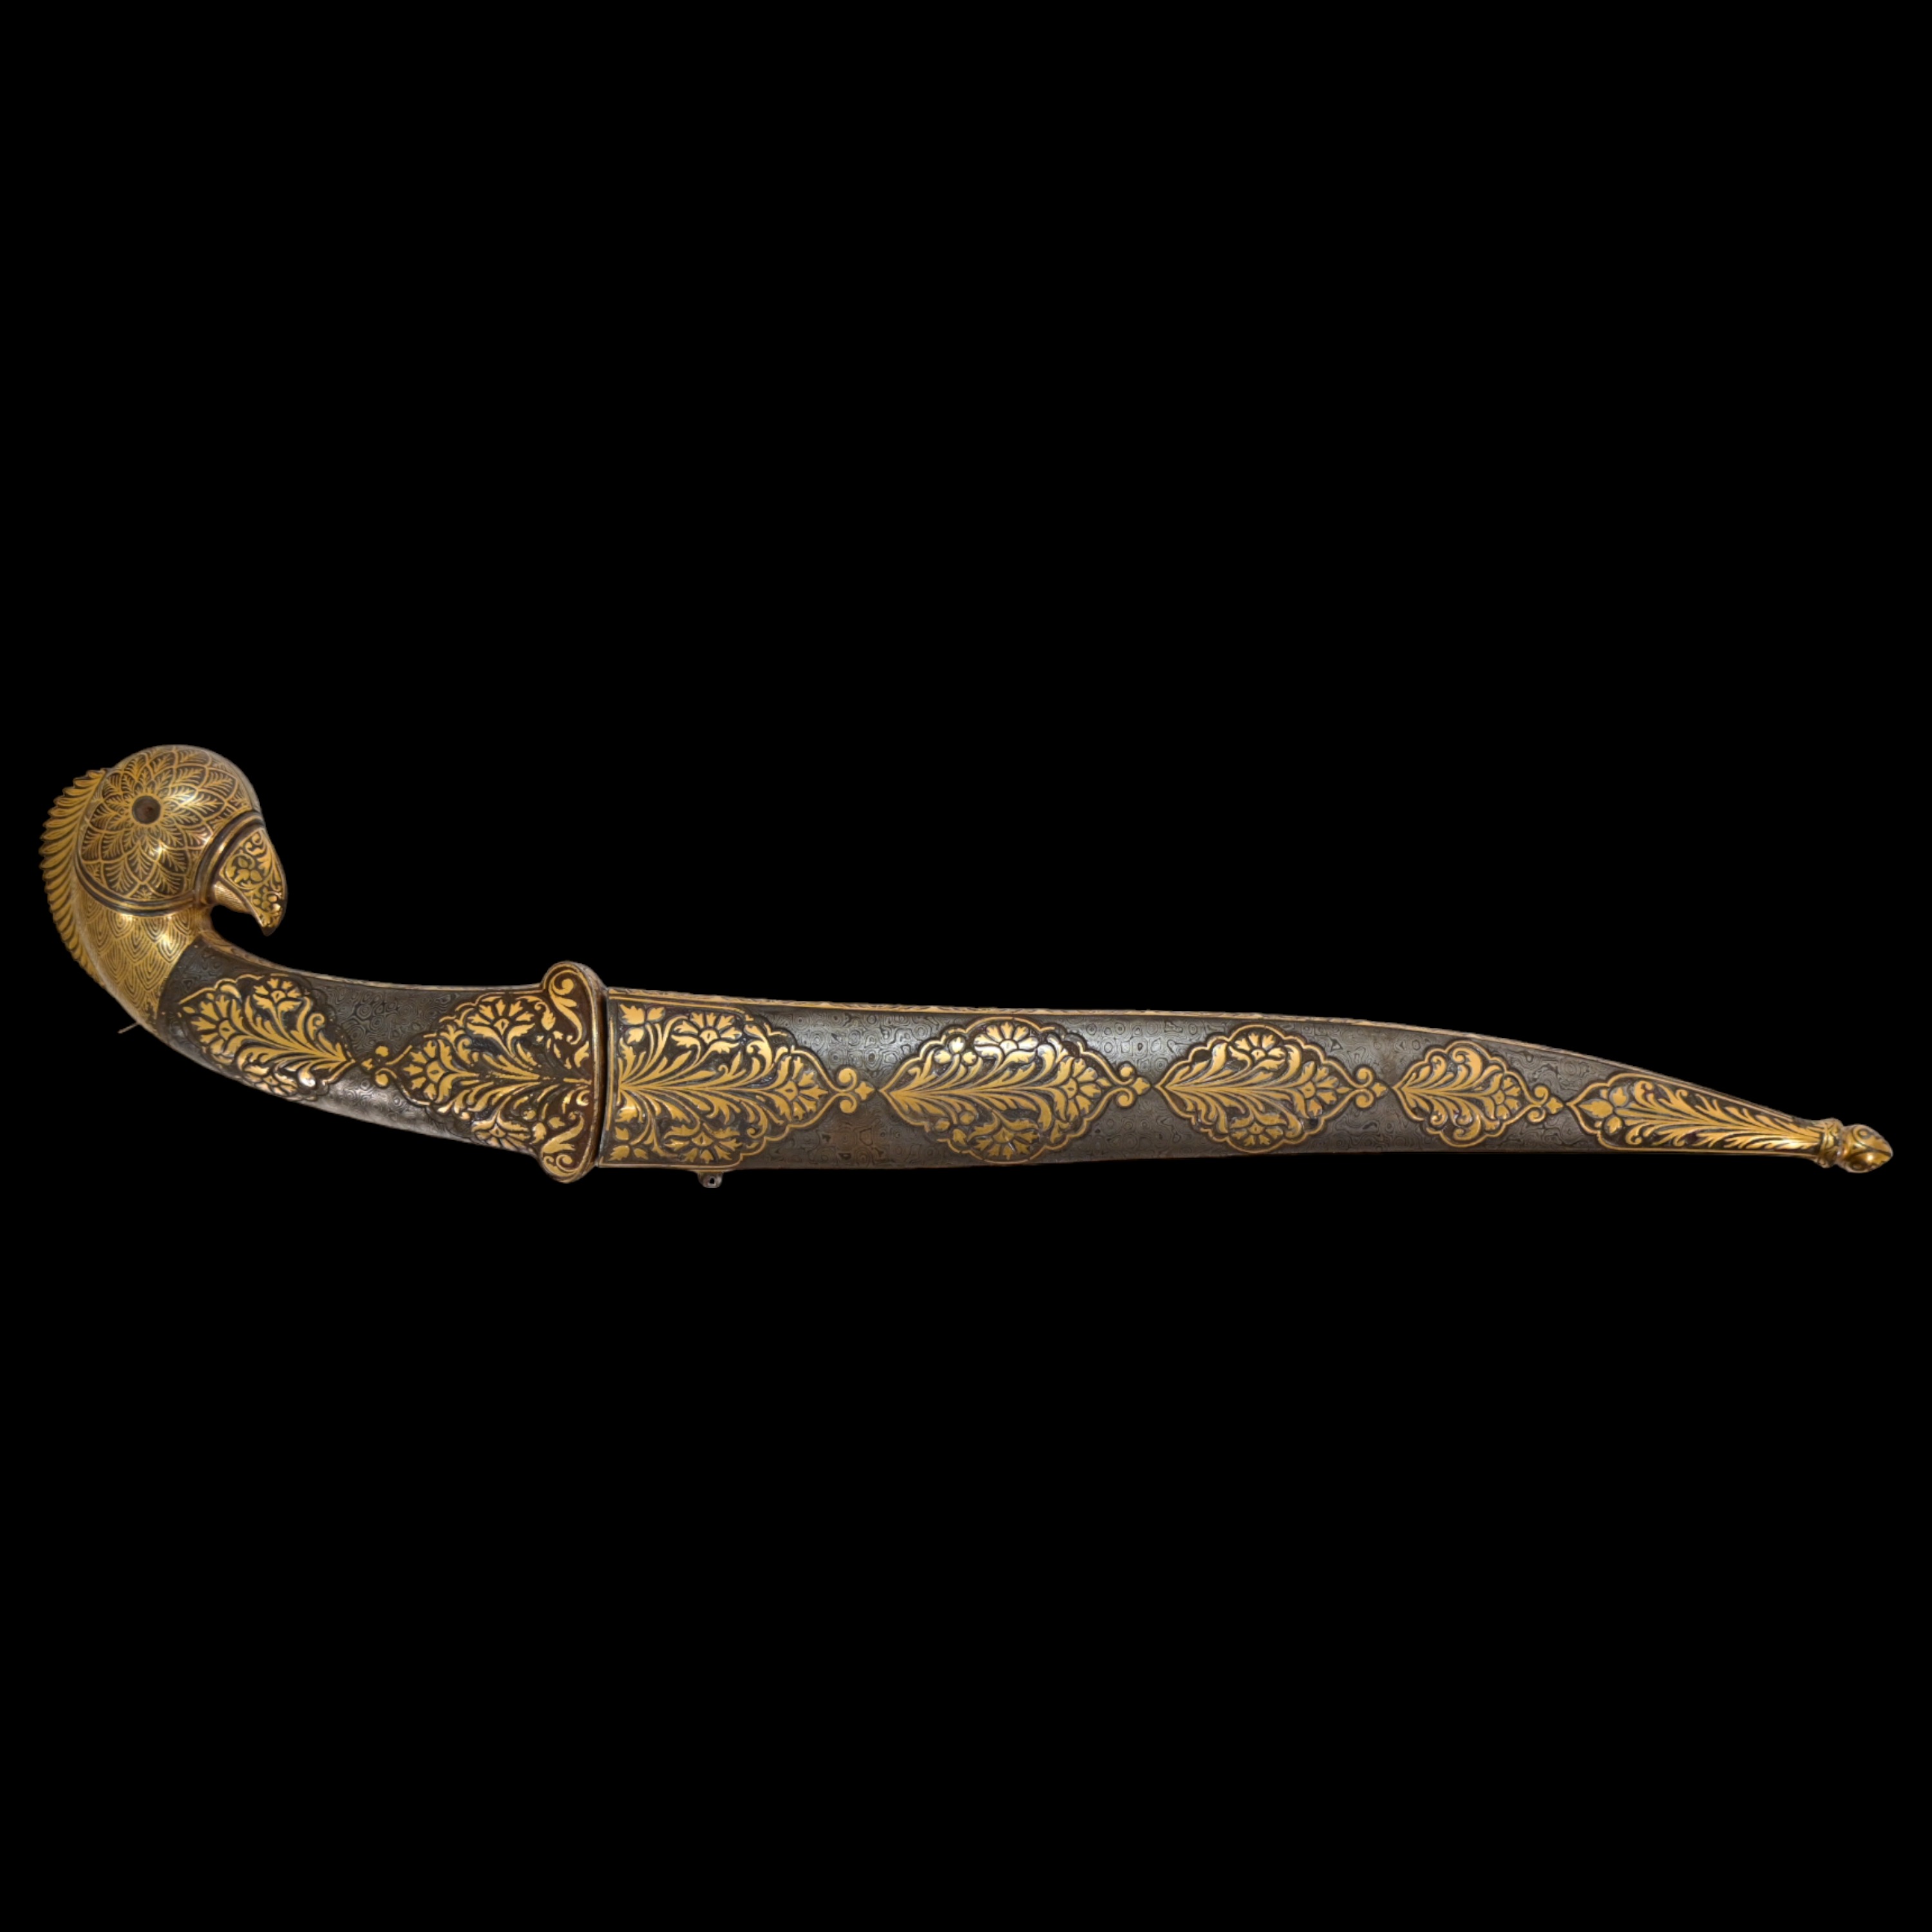 Richly decorated gold kofgari Indian dagger with wootz blade, 19th century. - Image 3 of 12